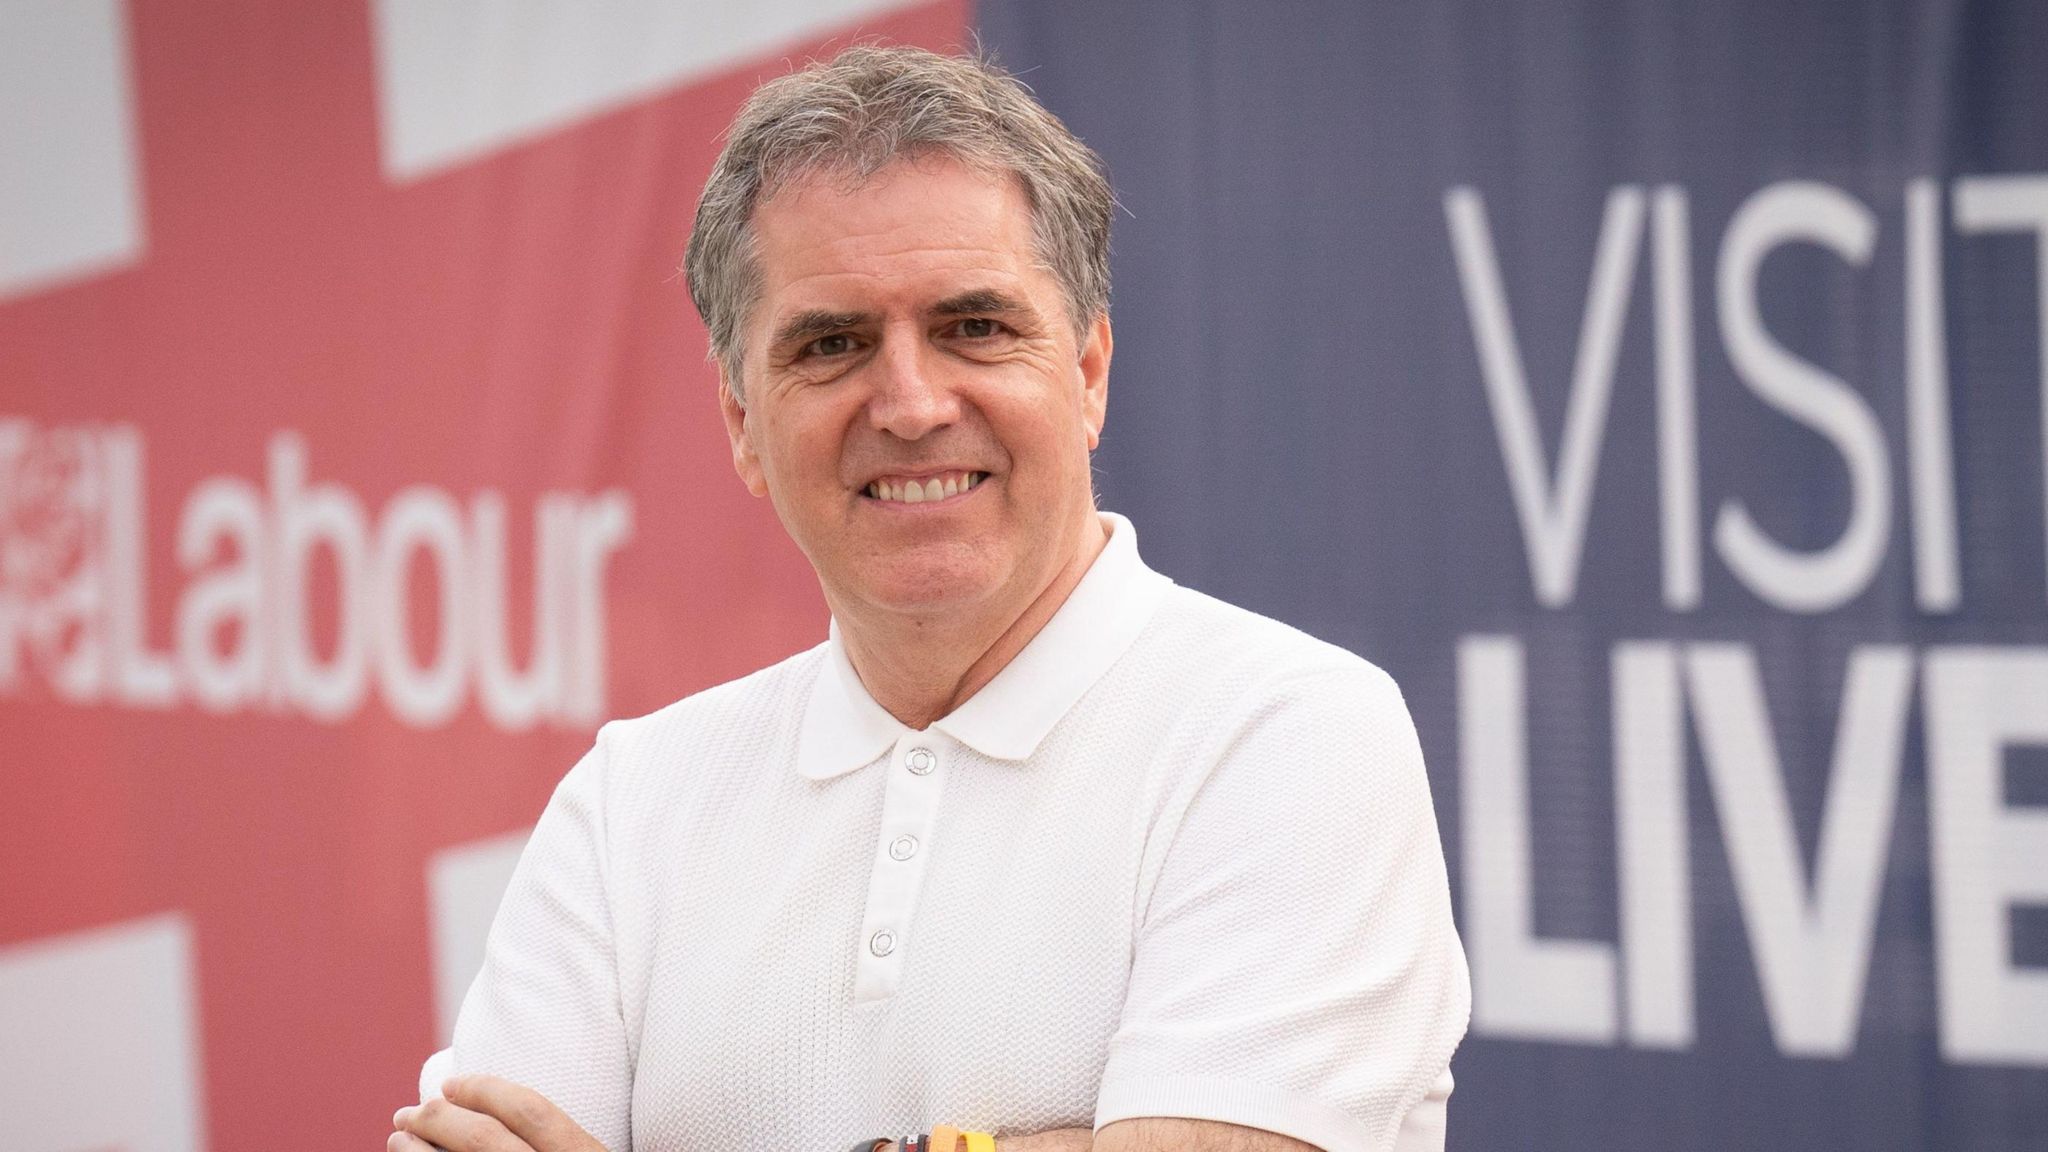 Labour candidate Steve Rotheram